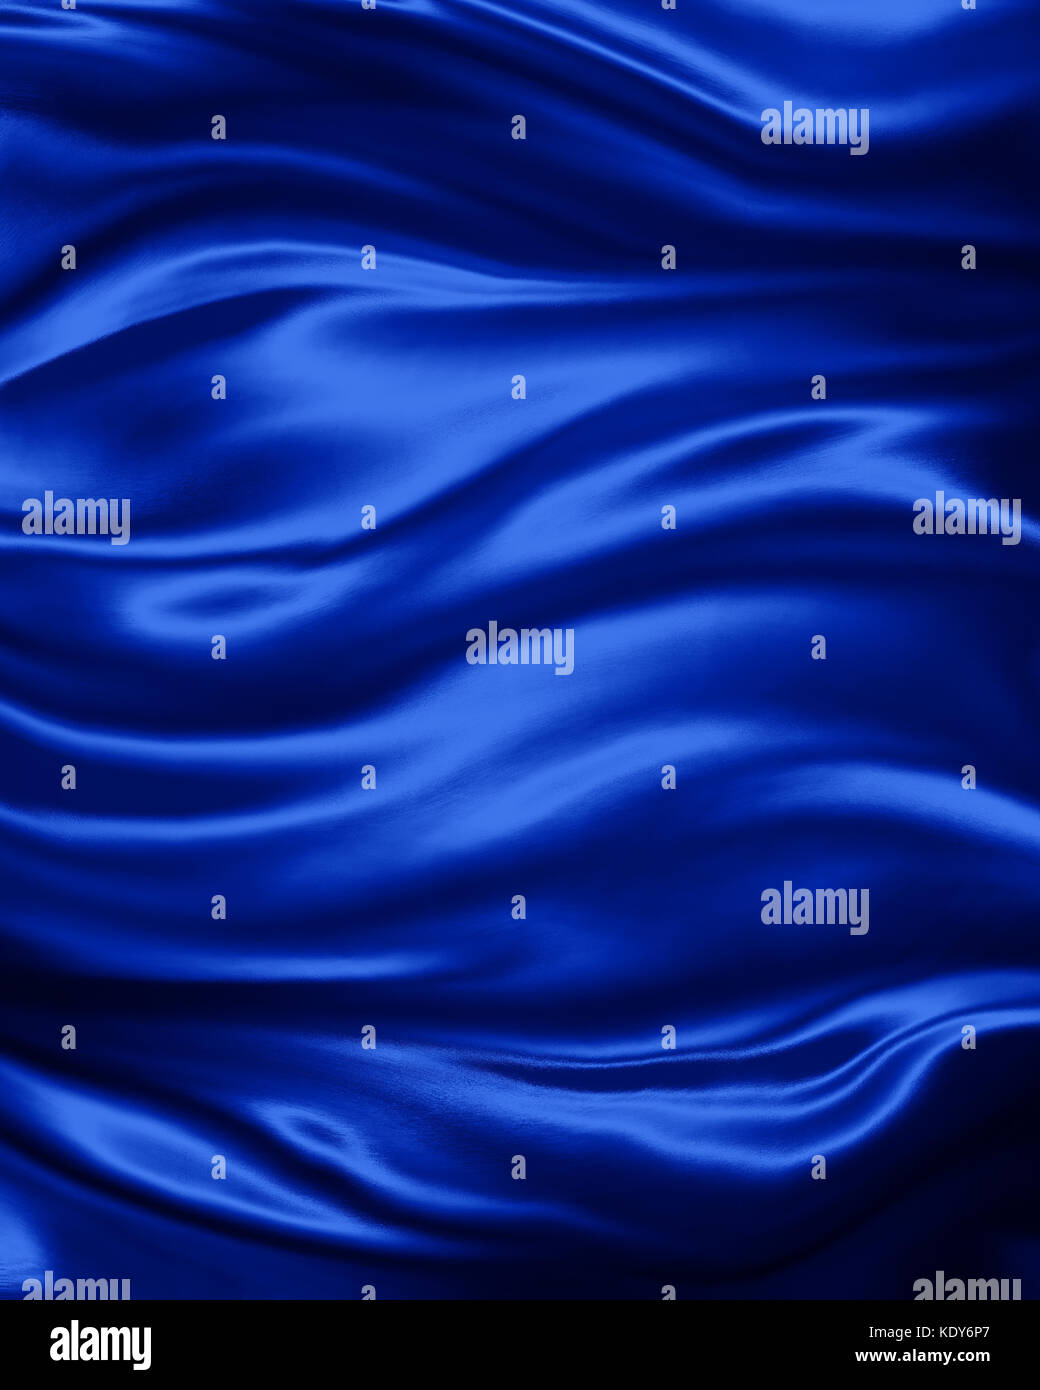 elegant luxury sapphire blue background with wavy draped folds of cloth, smooth silk texture with wrinkles and creases in flowing fabric Stock Photo